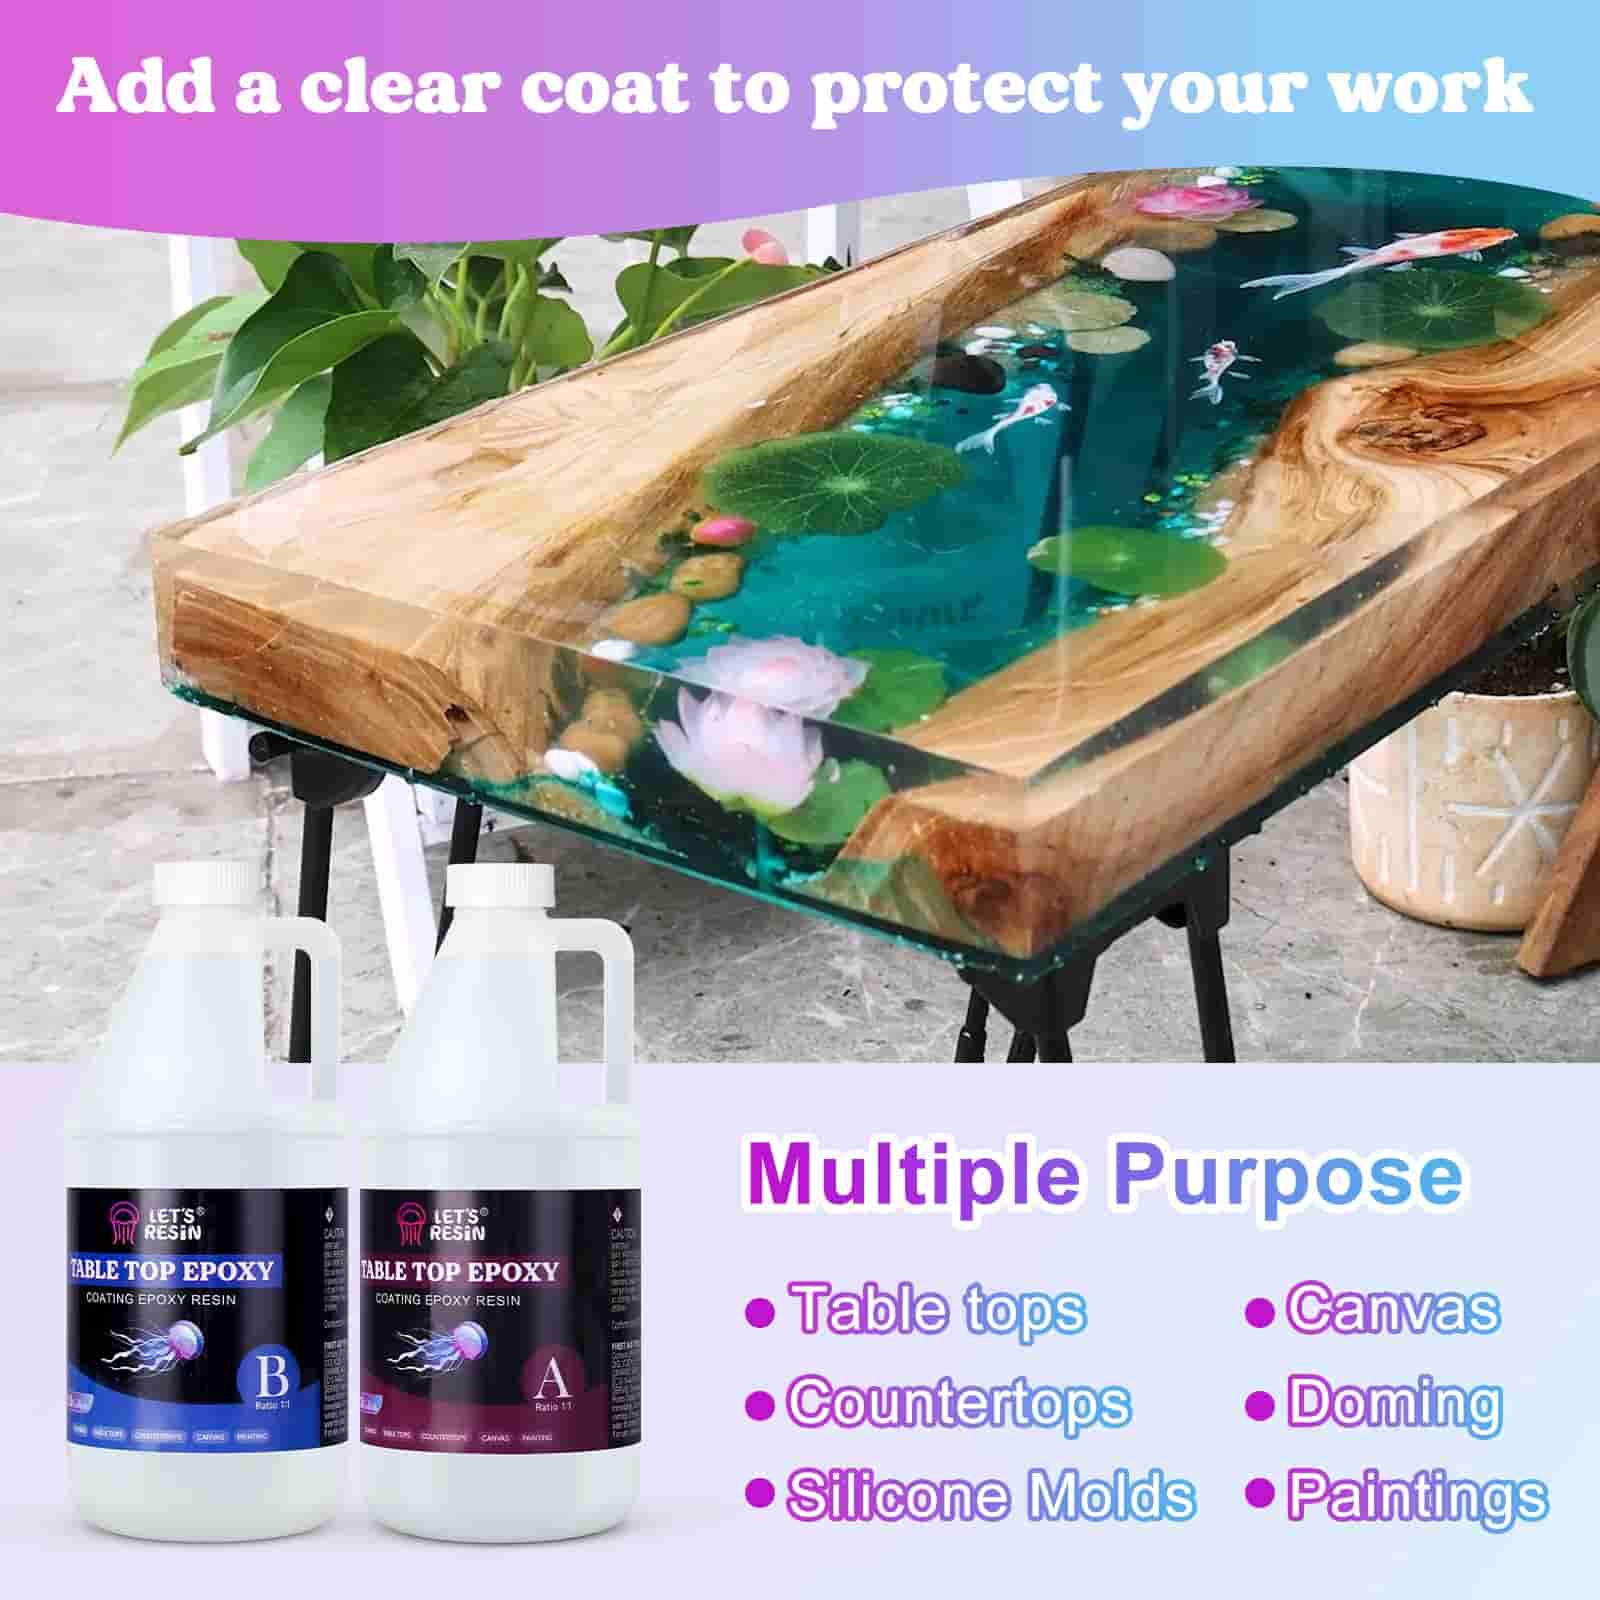 Let's Resin table top epoxy resin 1 gallon kit adds a clear coat to protect your work and has multiple purpose, such as table tops, canvas, countertops, doming, silicone molds, paintings and so on.